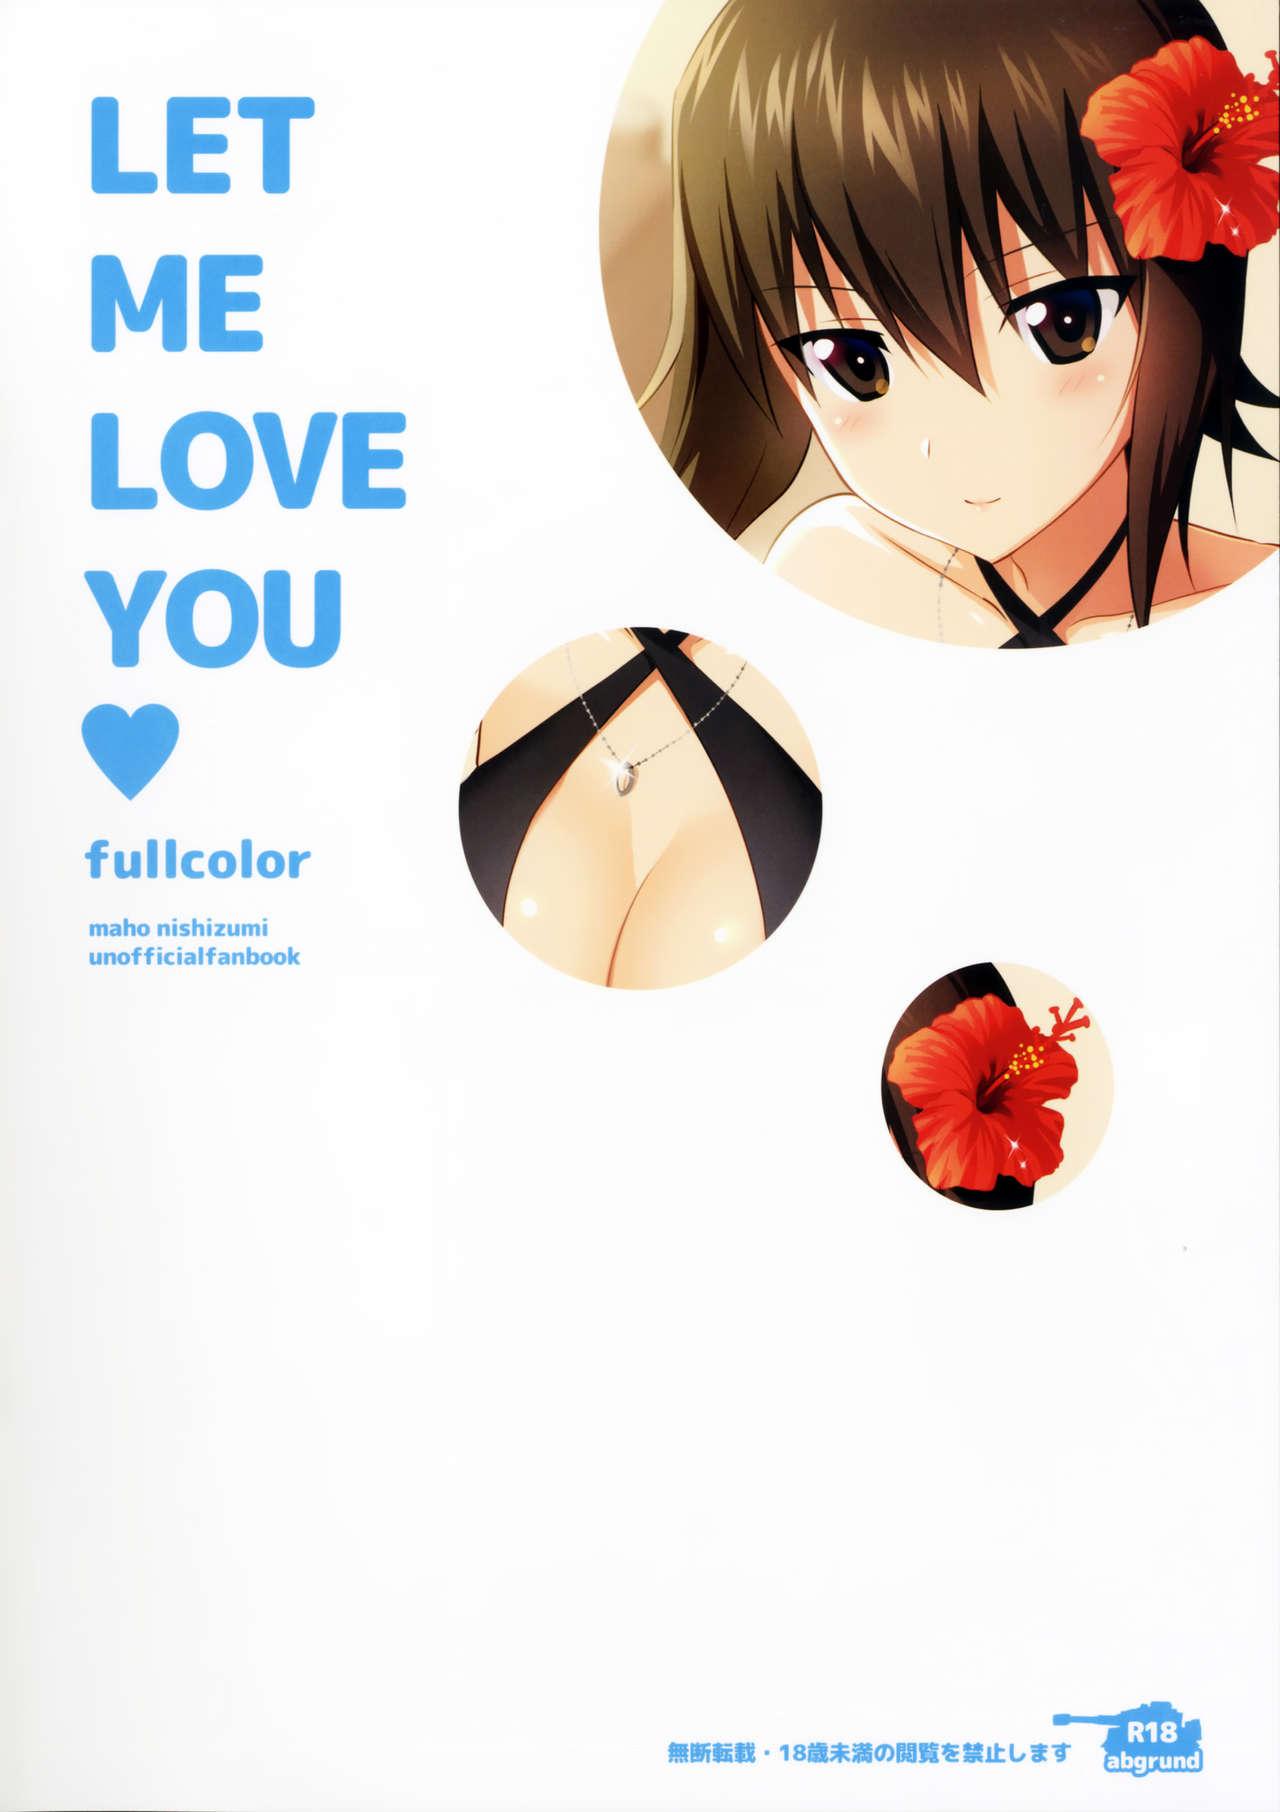 Real Amatuer Porn LET ME LOVE YOU fullcolor - Girls und panzer Blow Jobs Porn - Page 19